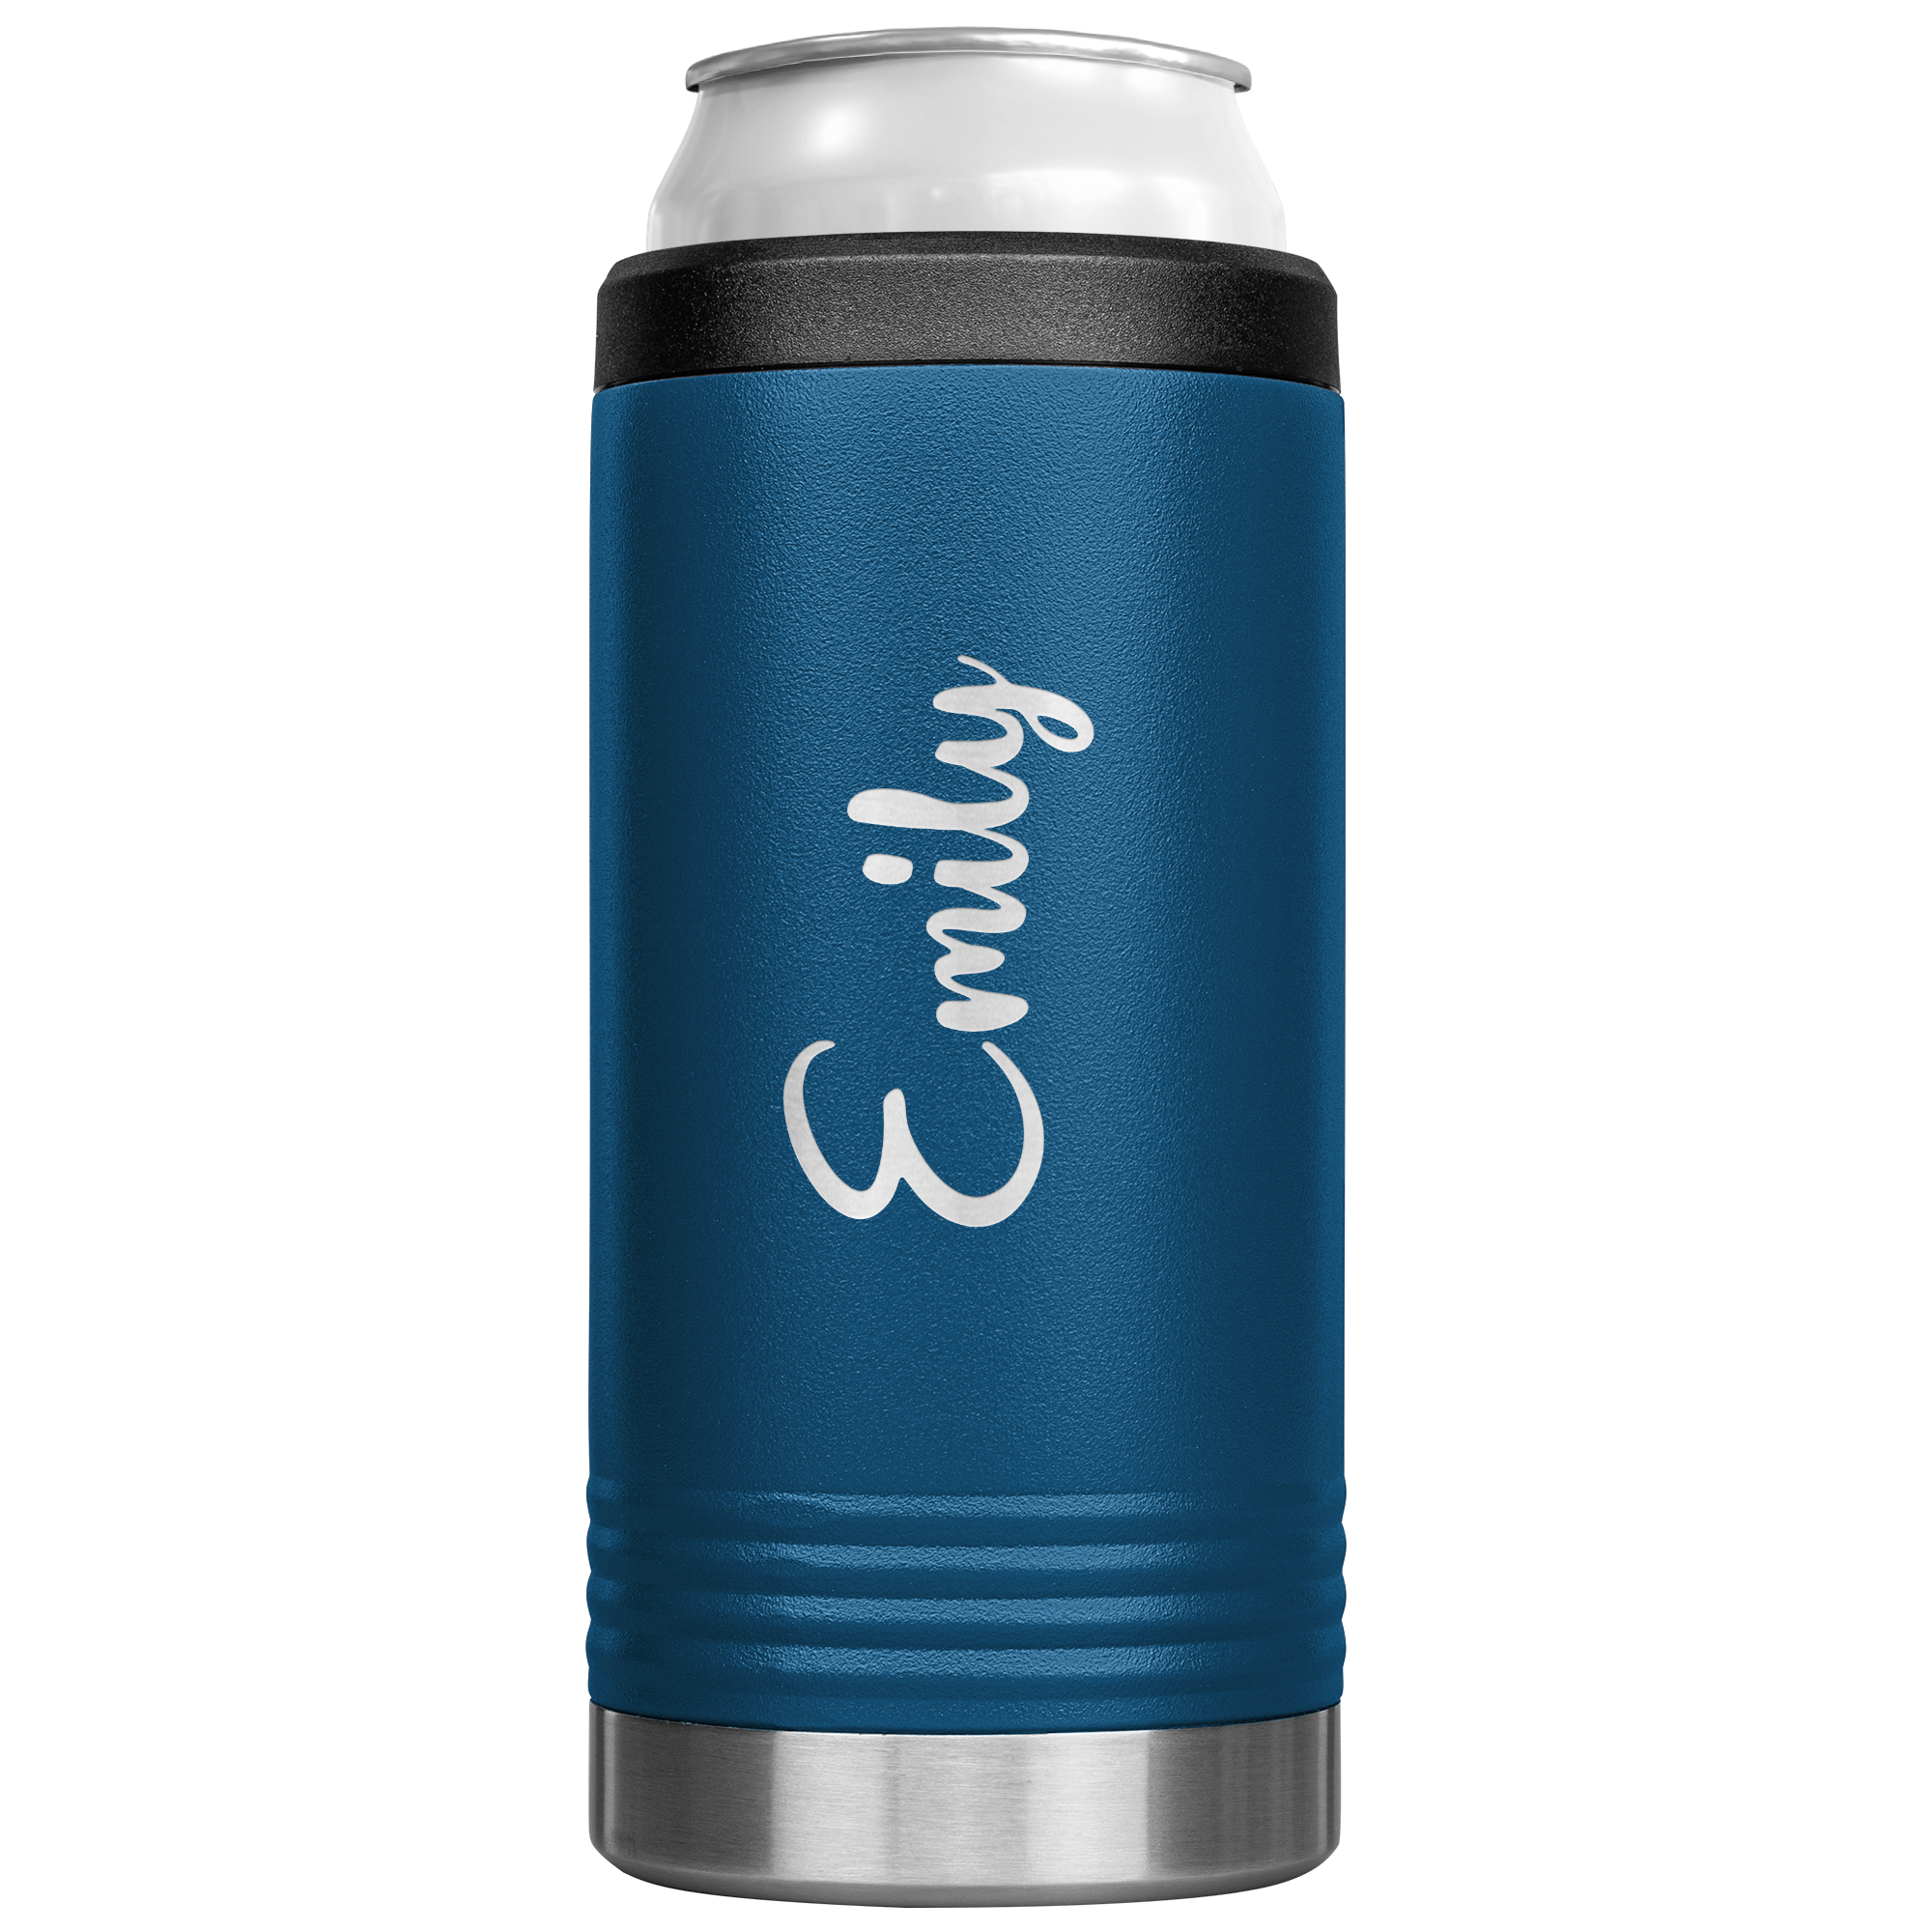 https://lantsagifts.com/wp-content/uploads/2022/10/Made-To-Teach-Personalized-Koozie-Blue-1.png